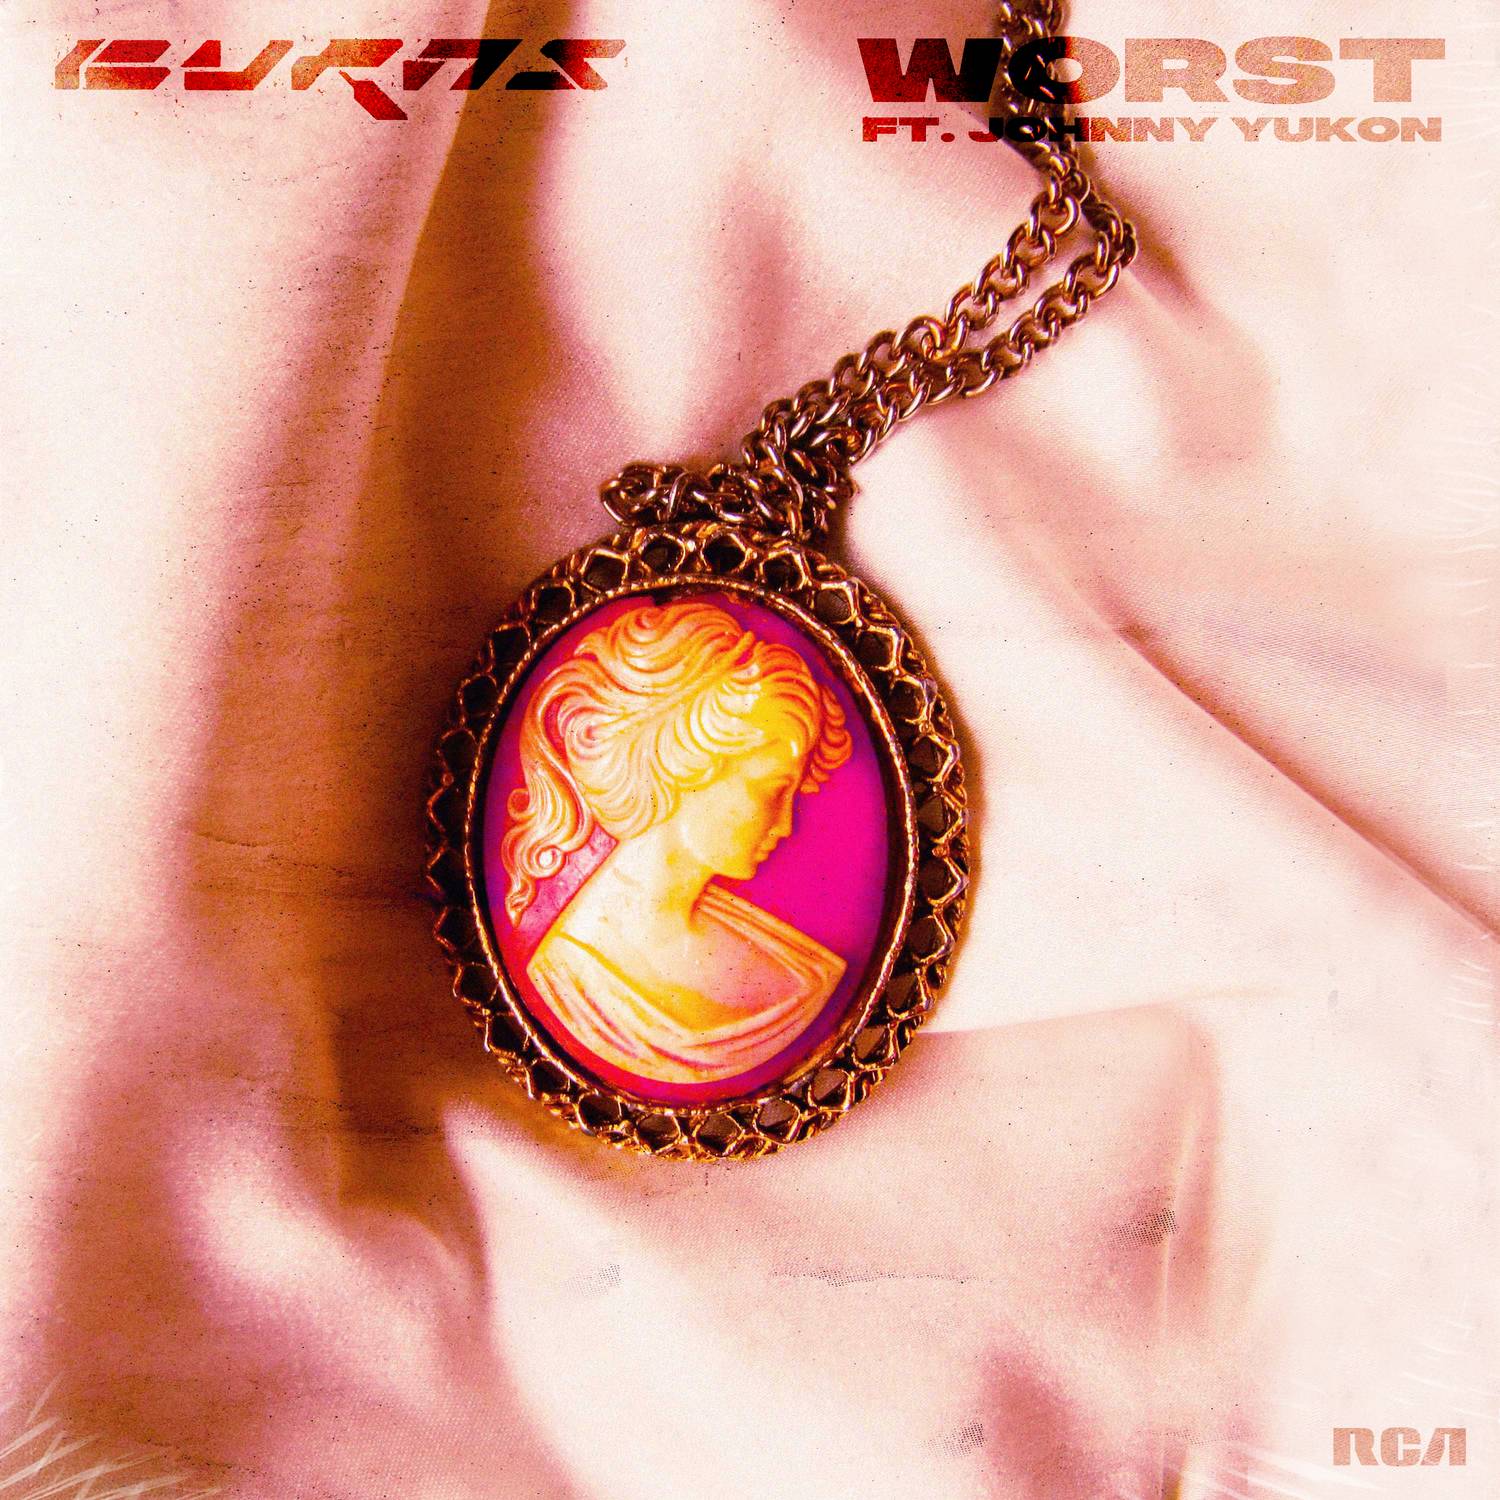 Worst (Extended Mix)